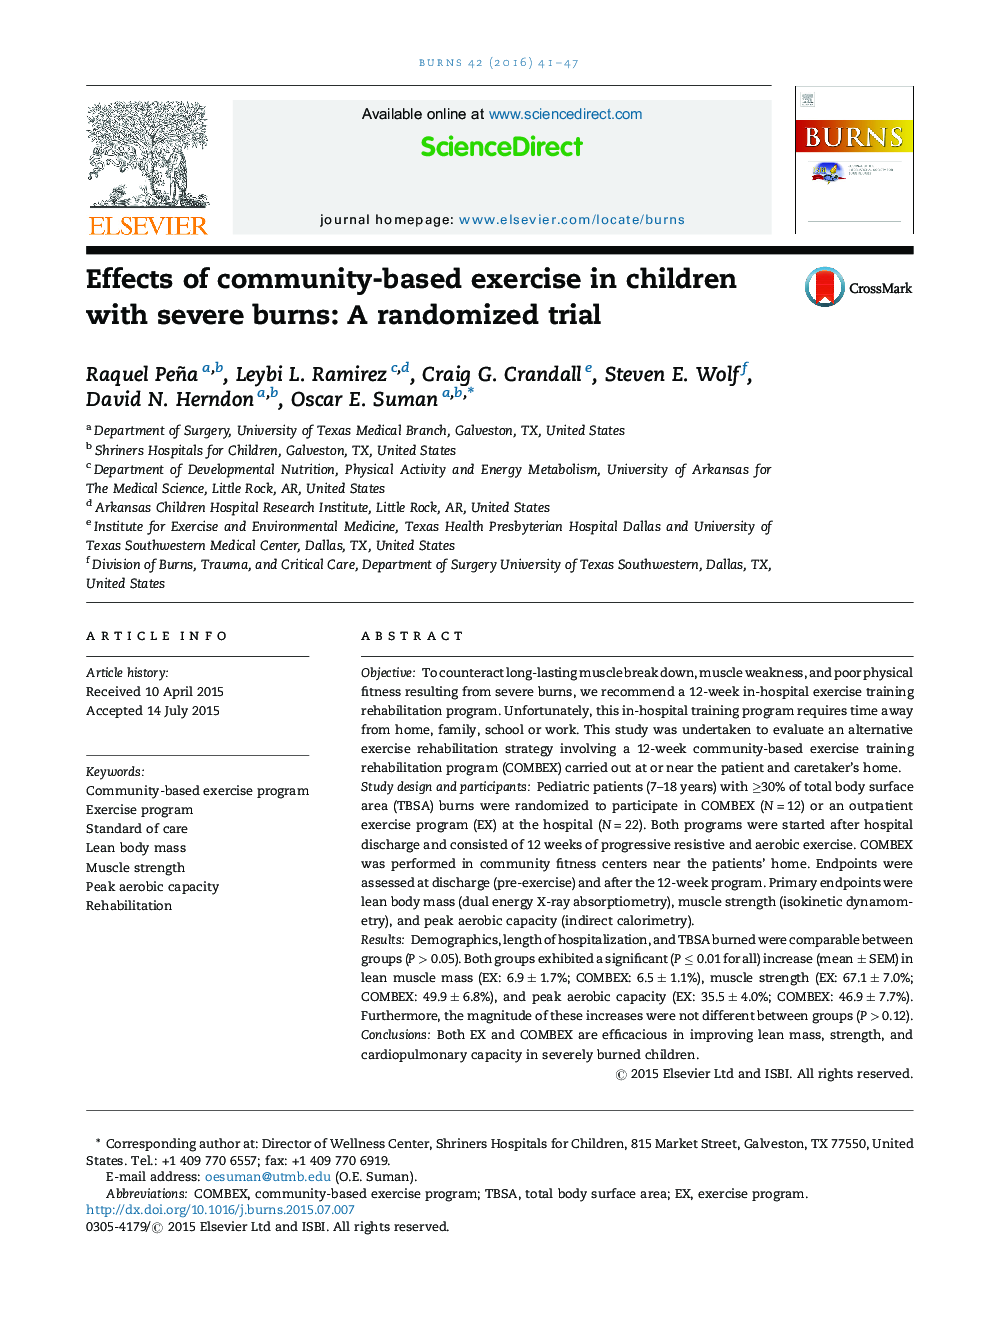 Effects of community-based exercise in children with severe burns: A randomized trial